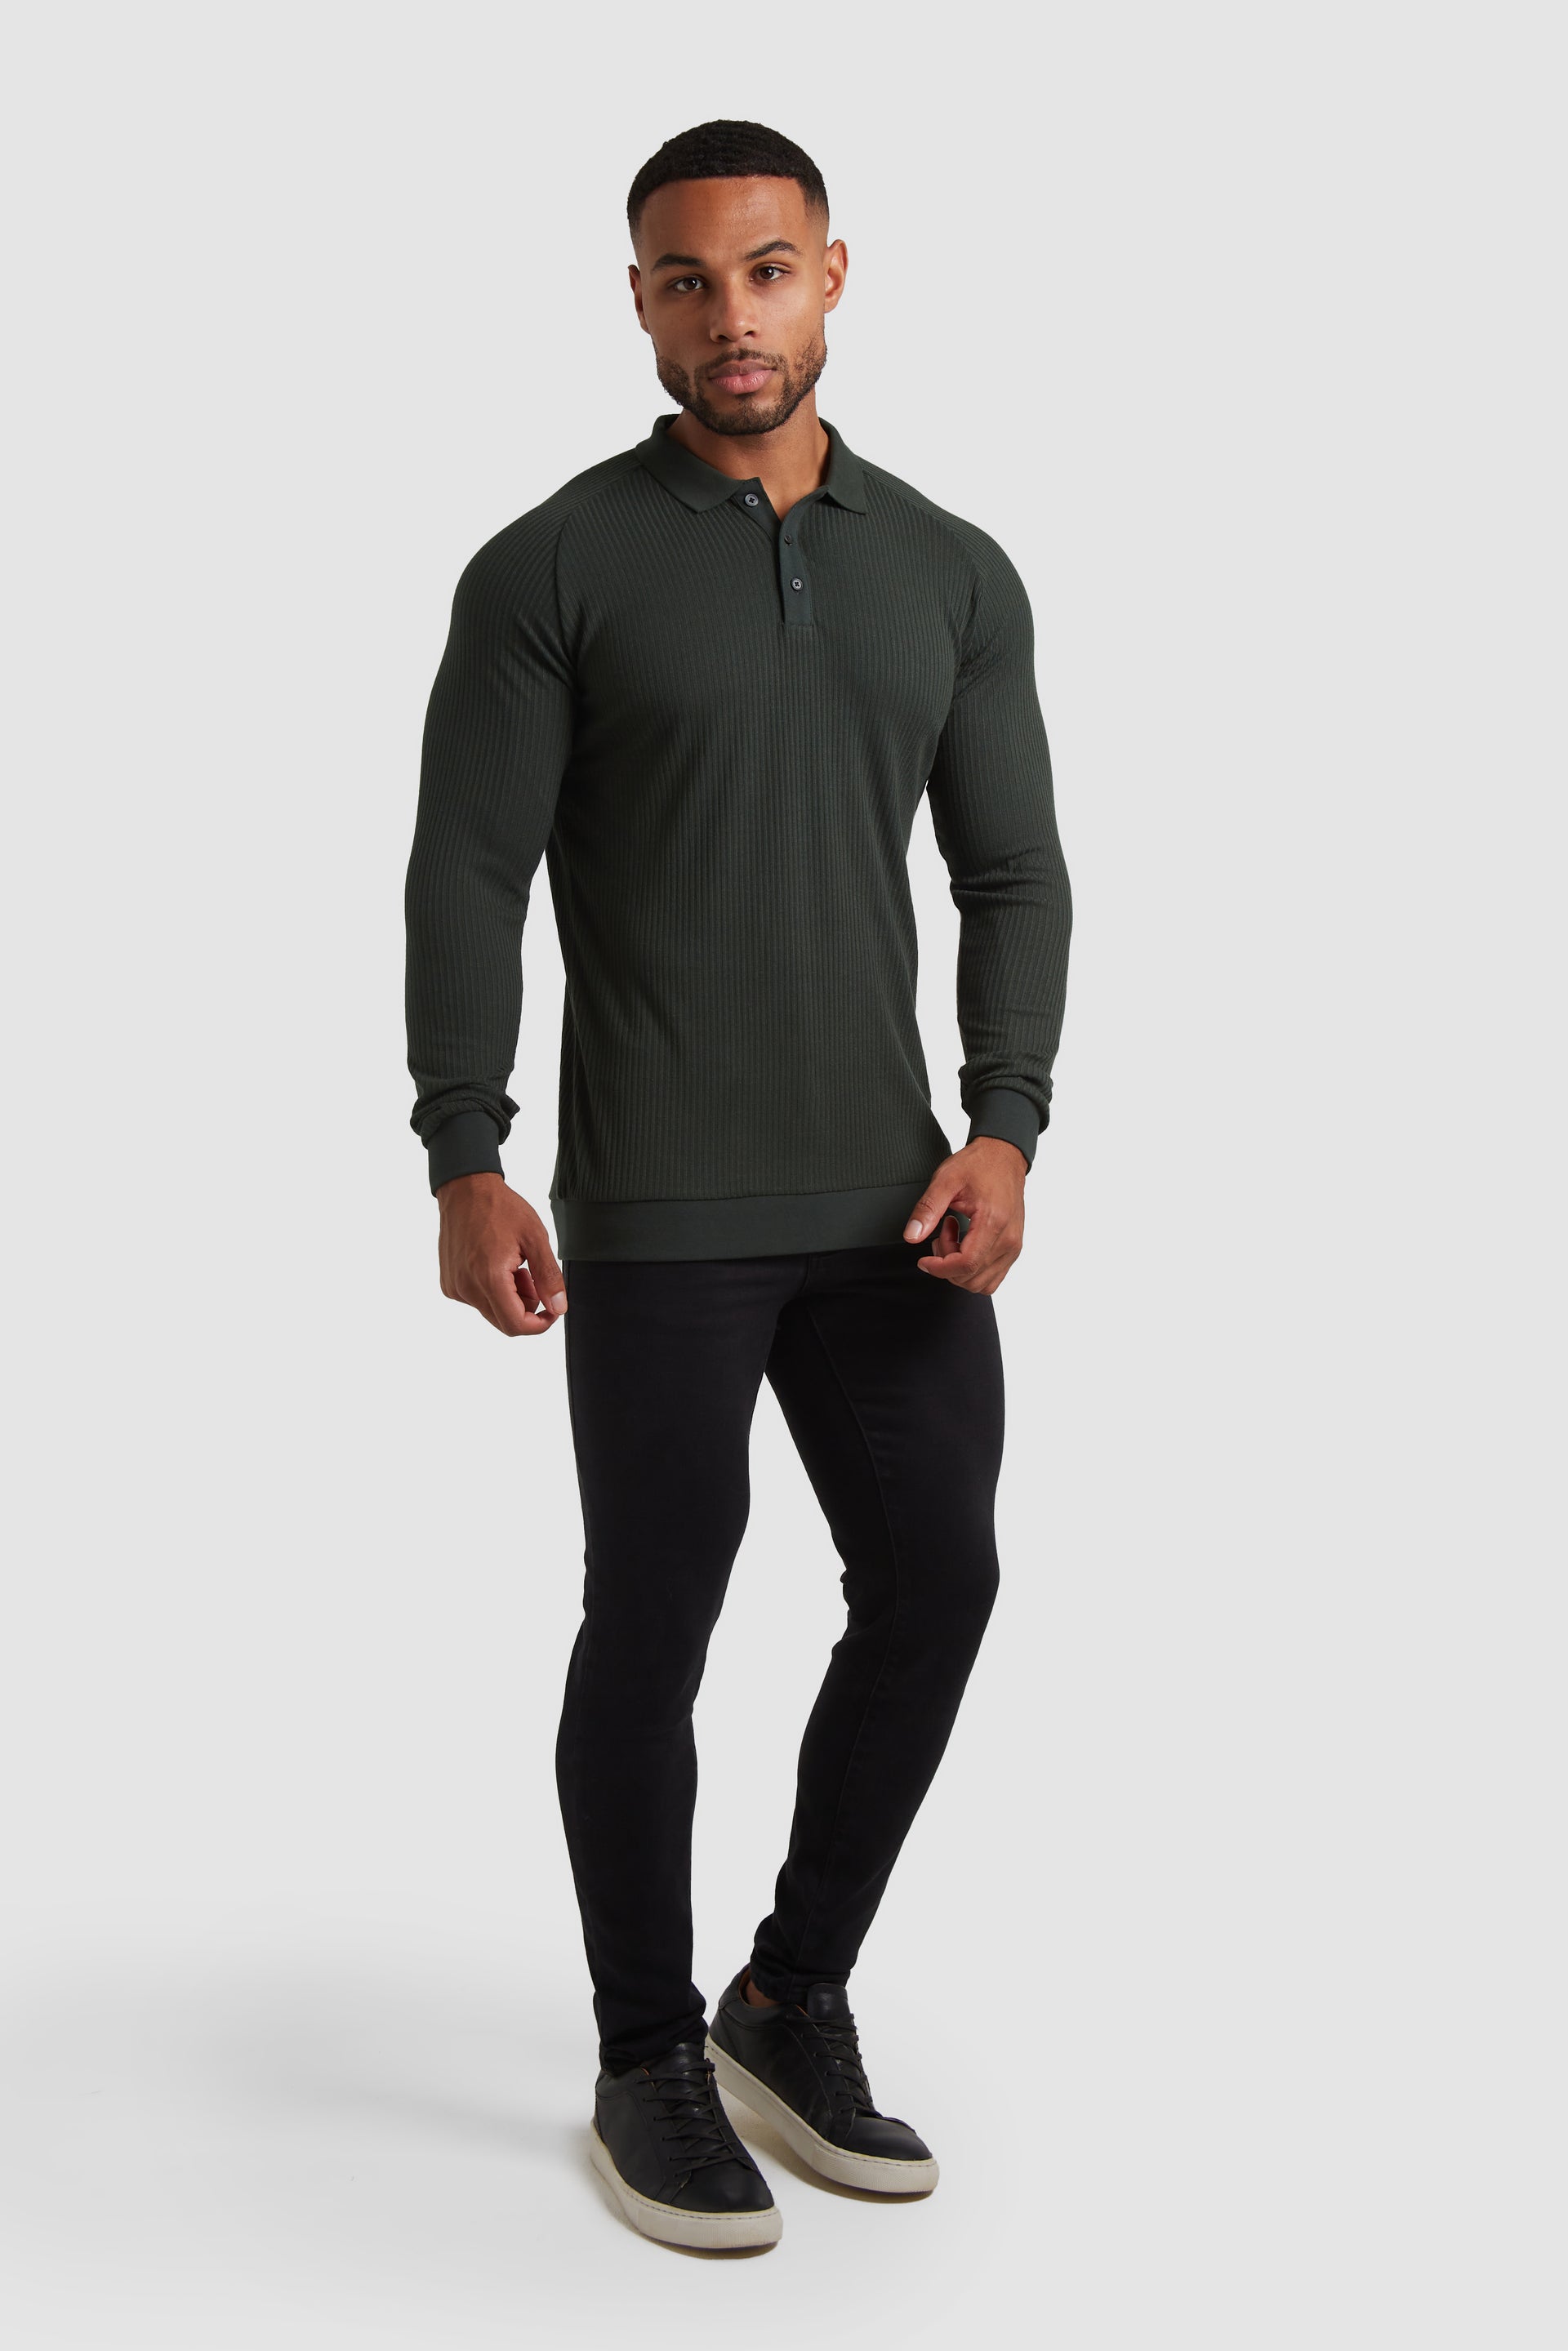 Ribbed Polo in Dark Forest - TAILORED ATHLETE - ROW